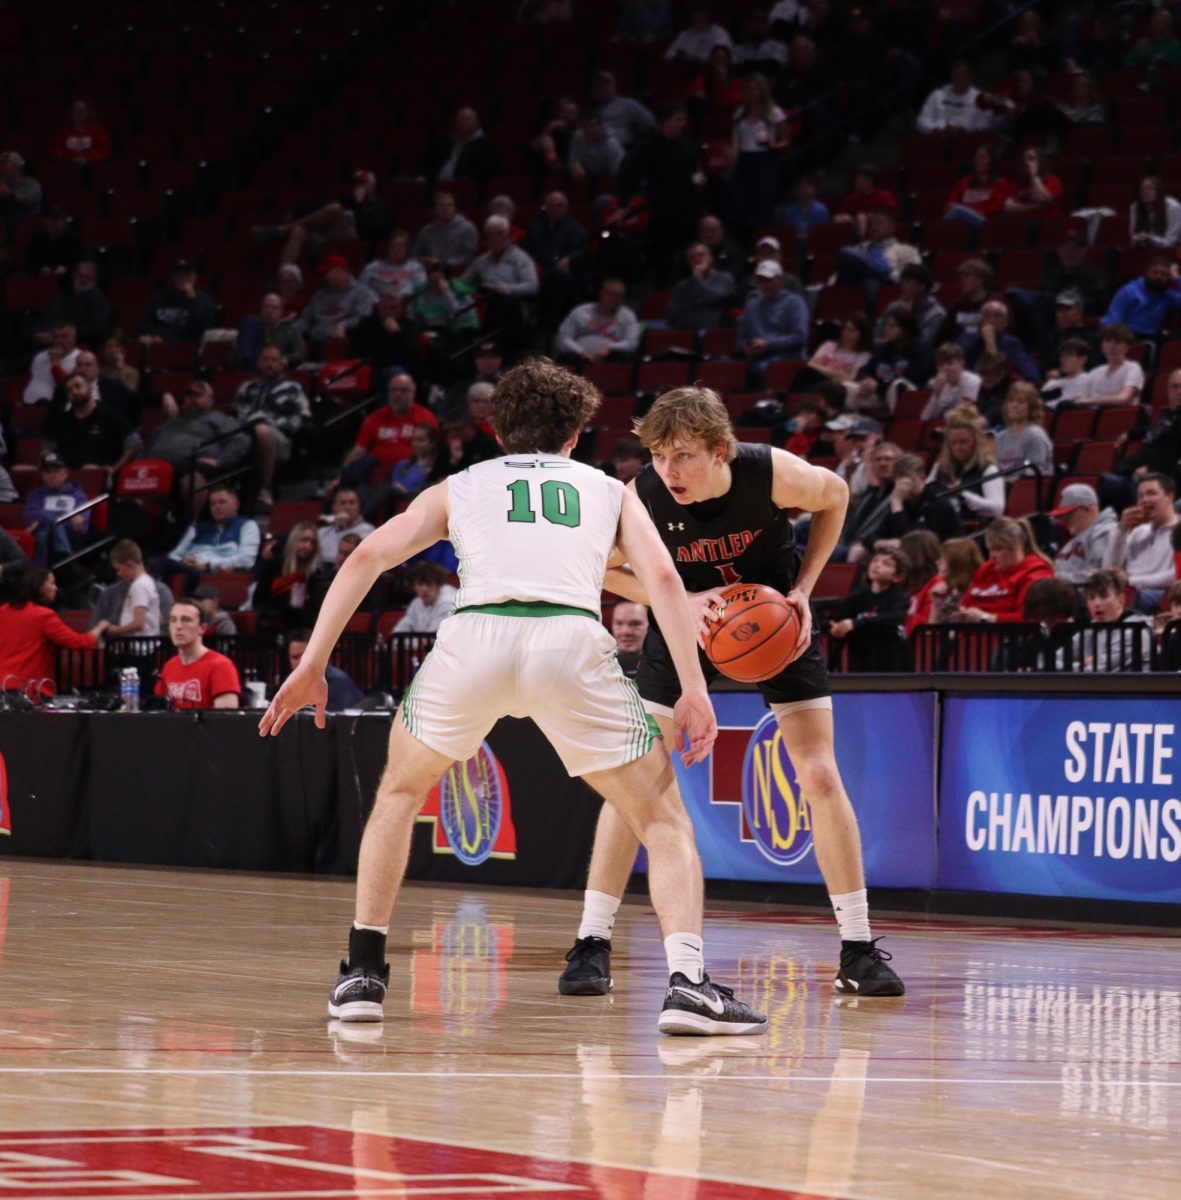 Senior Colin Comstock picks up his dribble to pass the ball. Antlers lost to Skyhawks 61 to 69 in the State Quarter Finals.